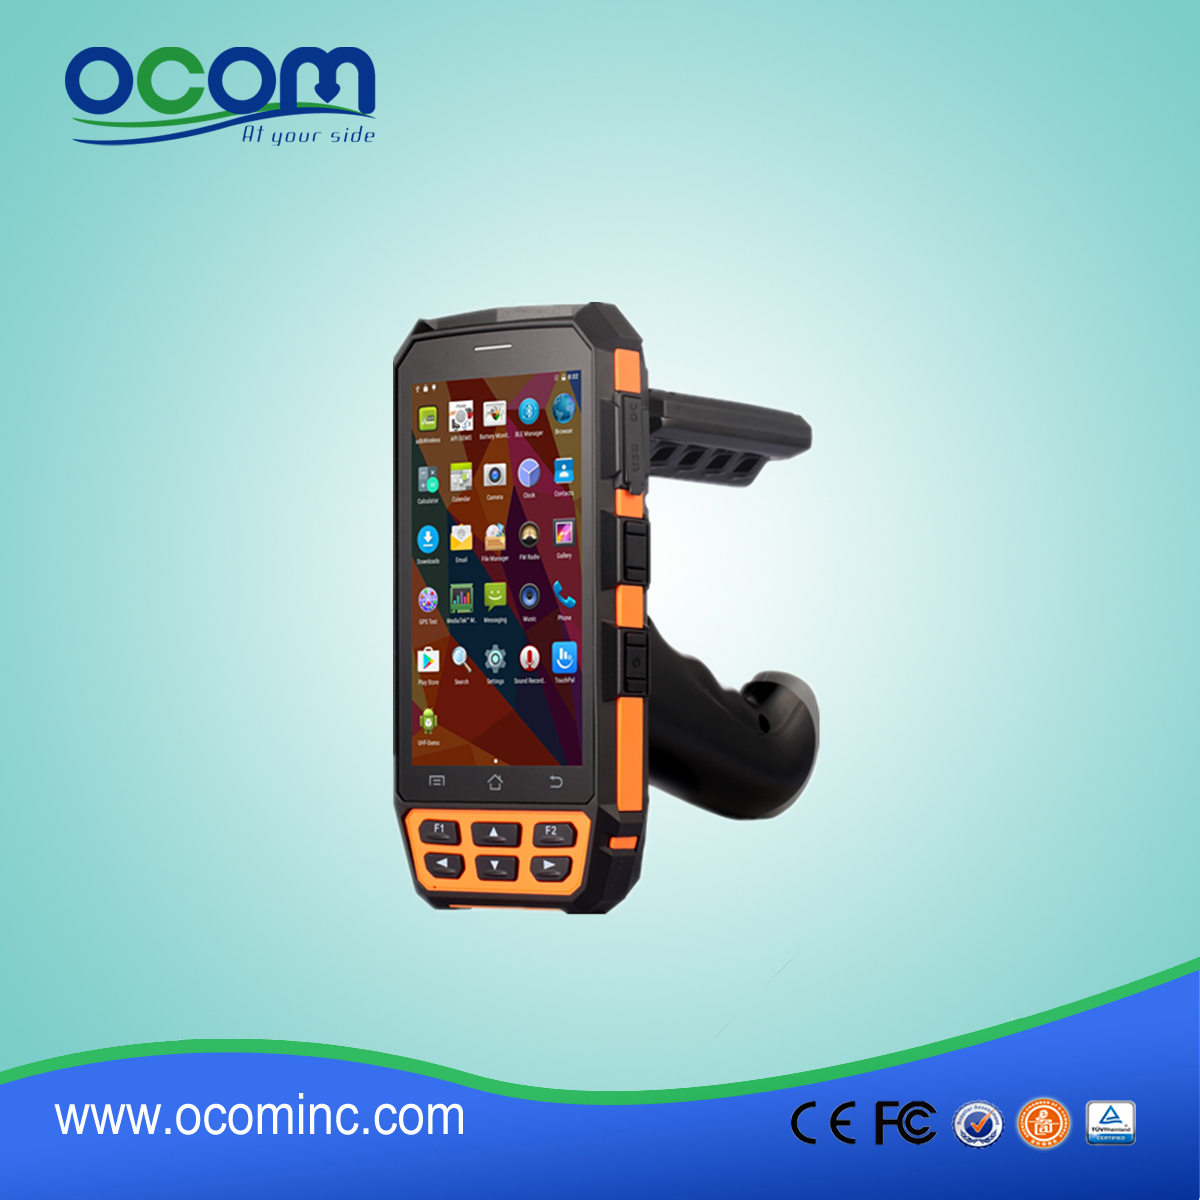 OCBS-D5000 Rugged Industrial Android PDA with 2d barcode scanner fingerprint reader